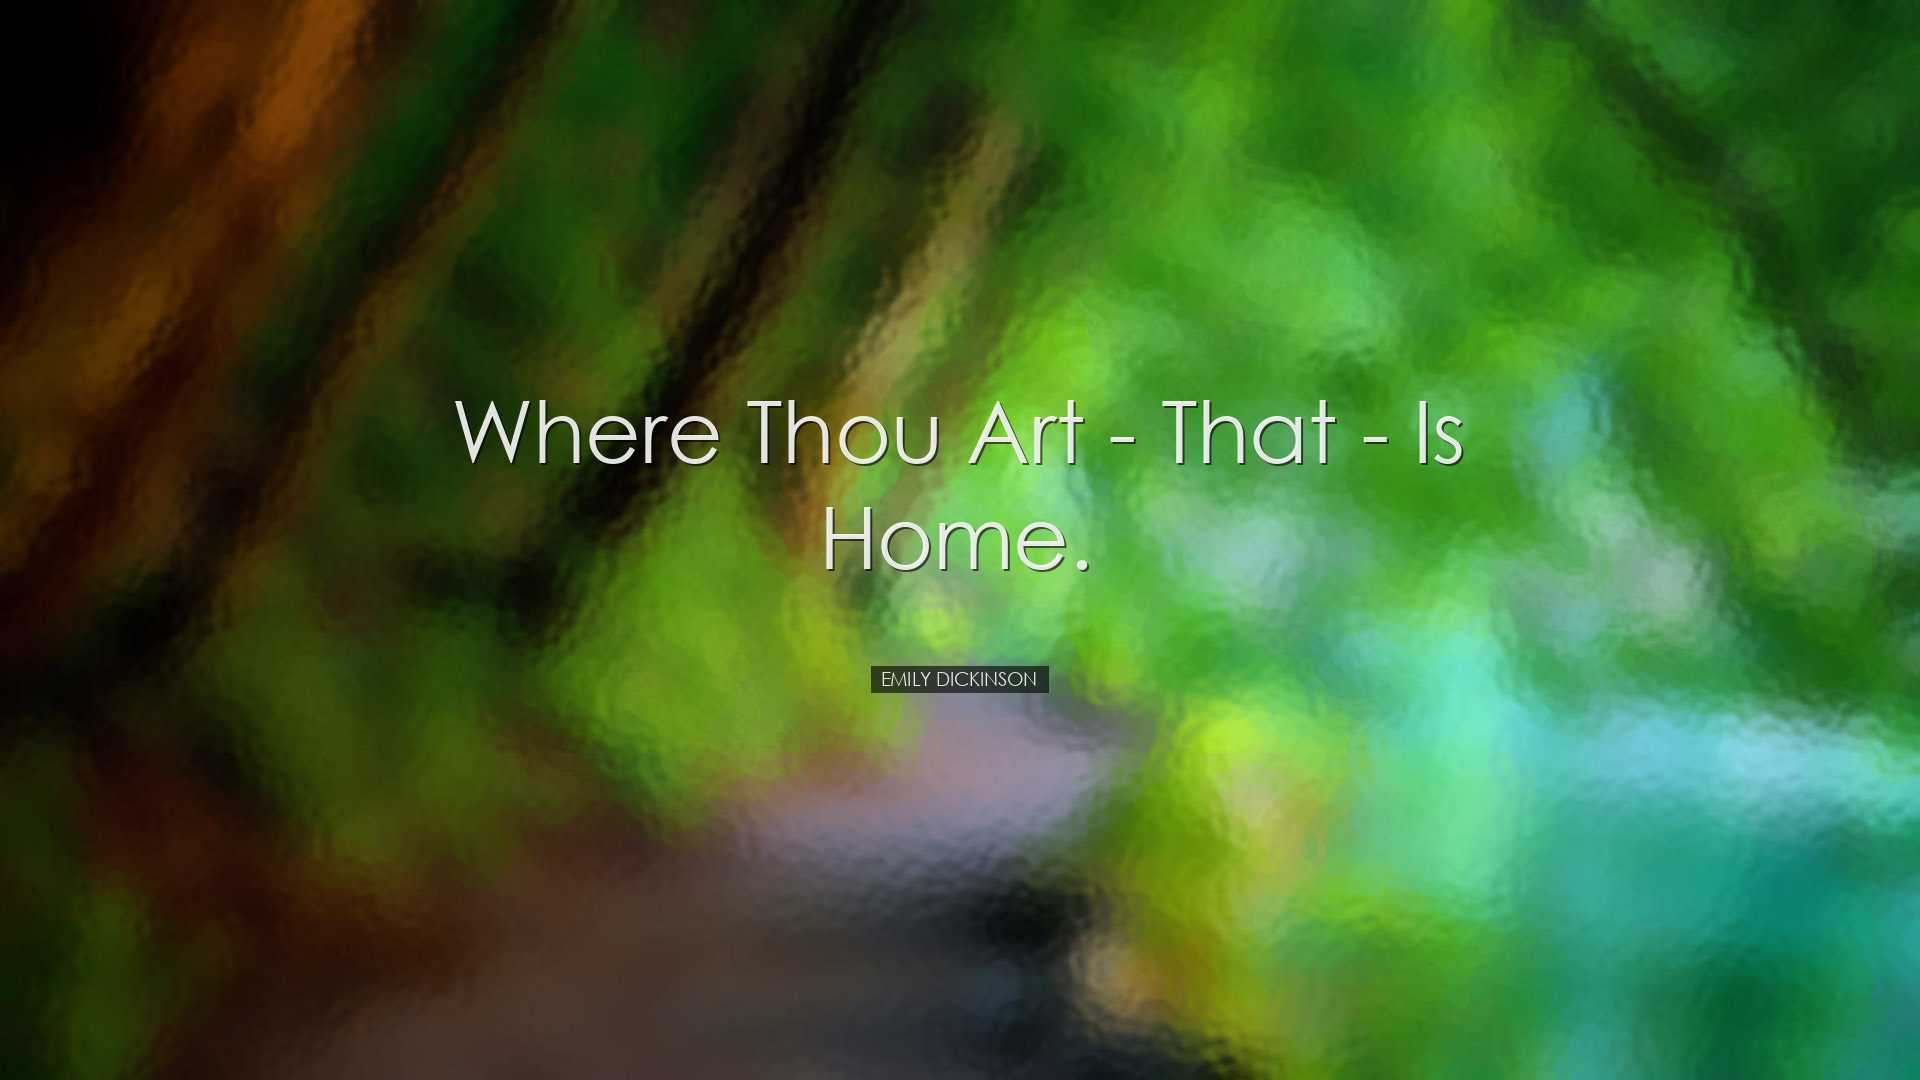 Where thou art - that - is Home. - Emily Dickinson